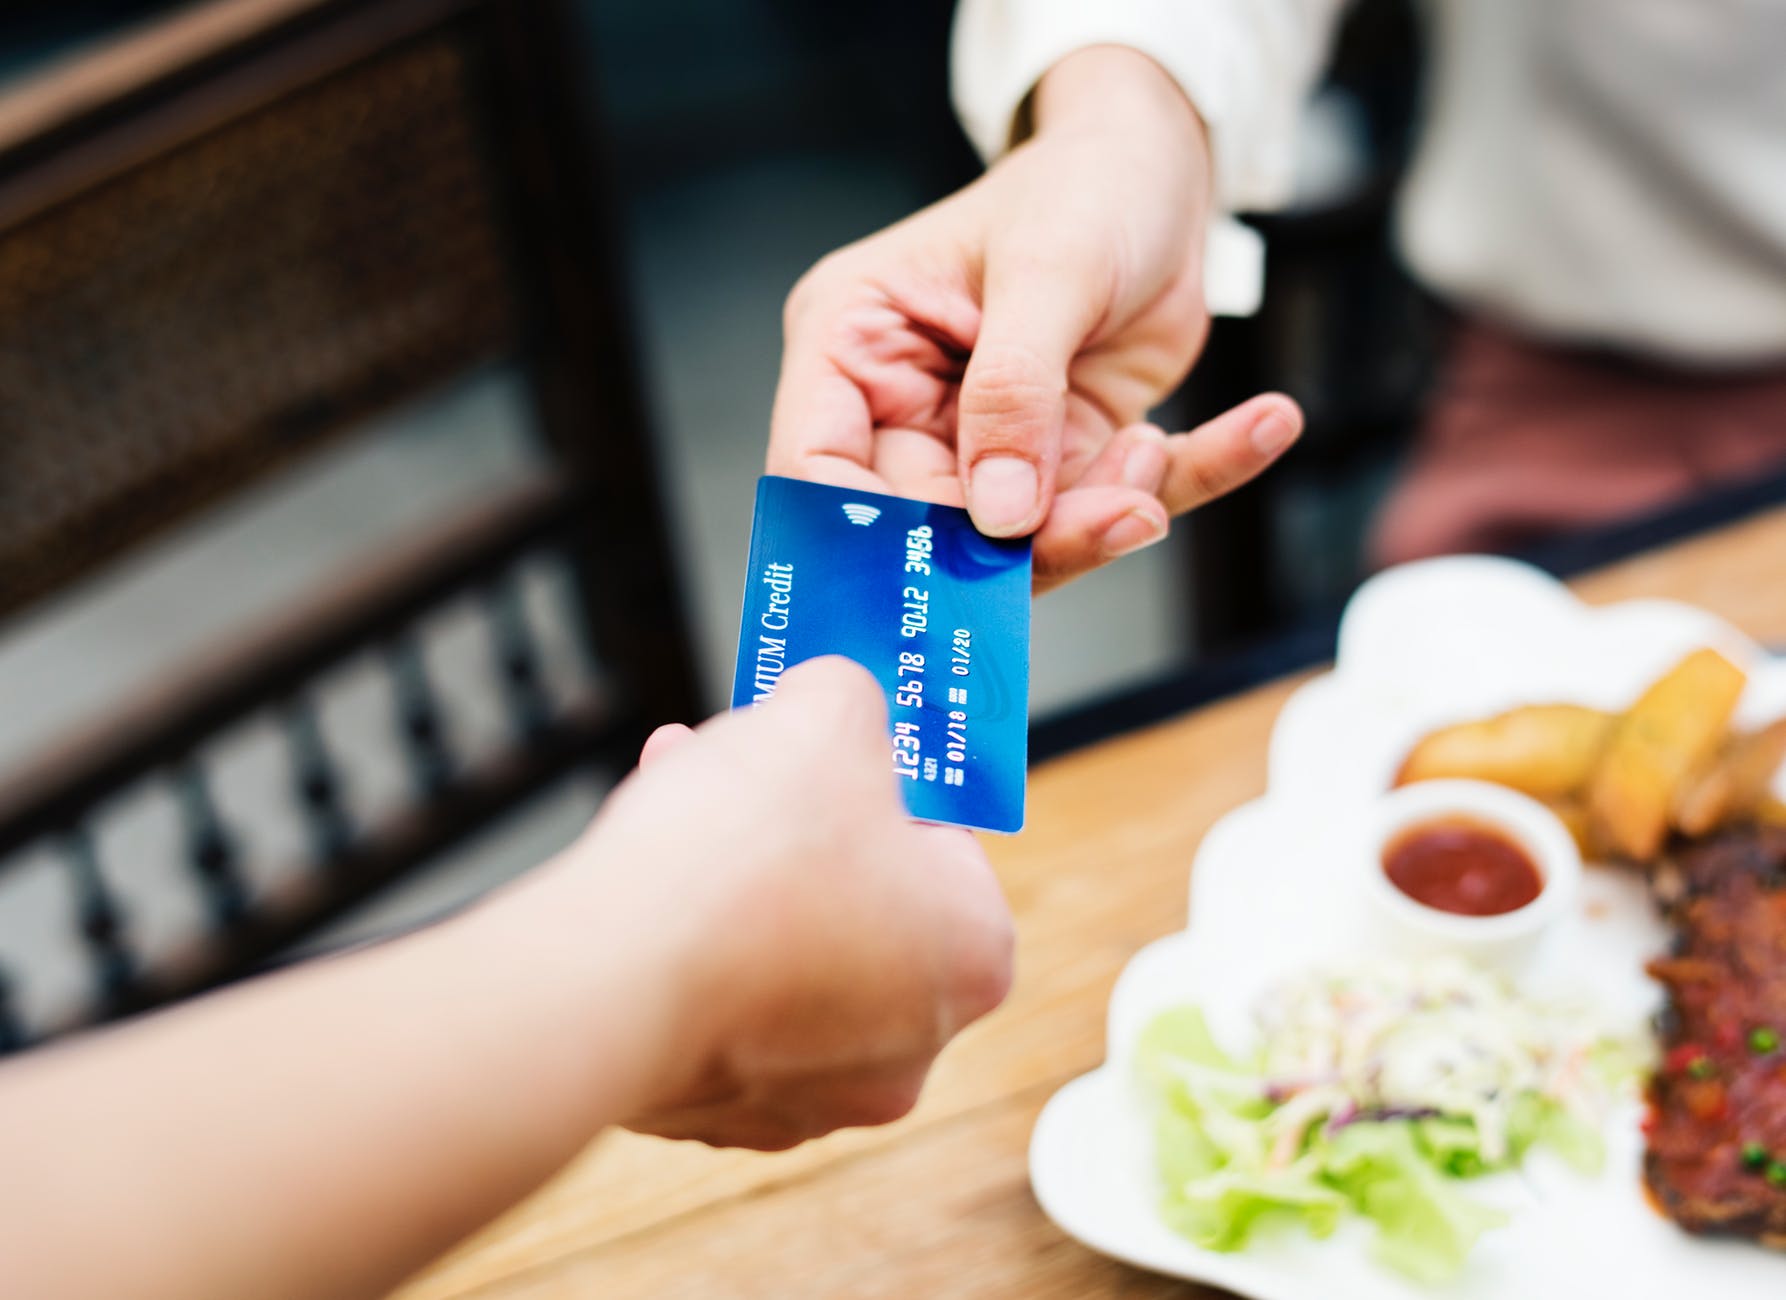 Benefits of Cash Cards You may not Aware of Before